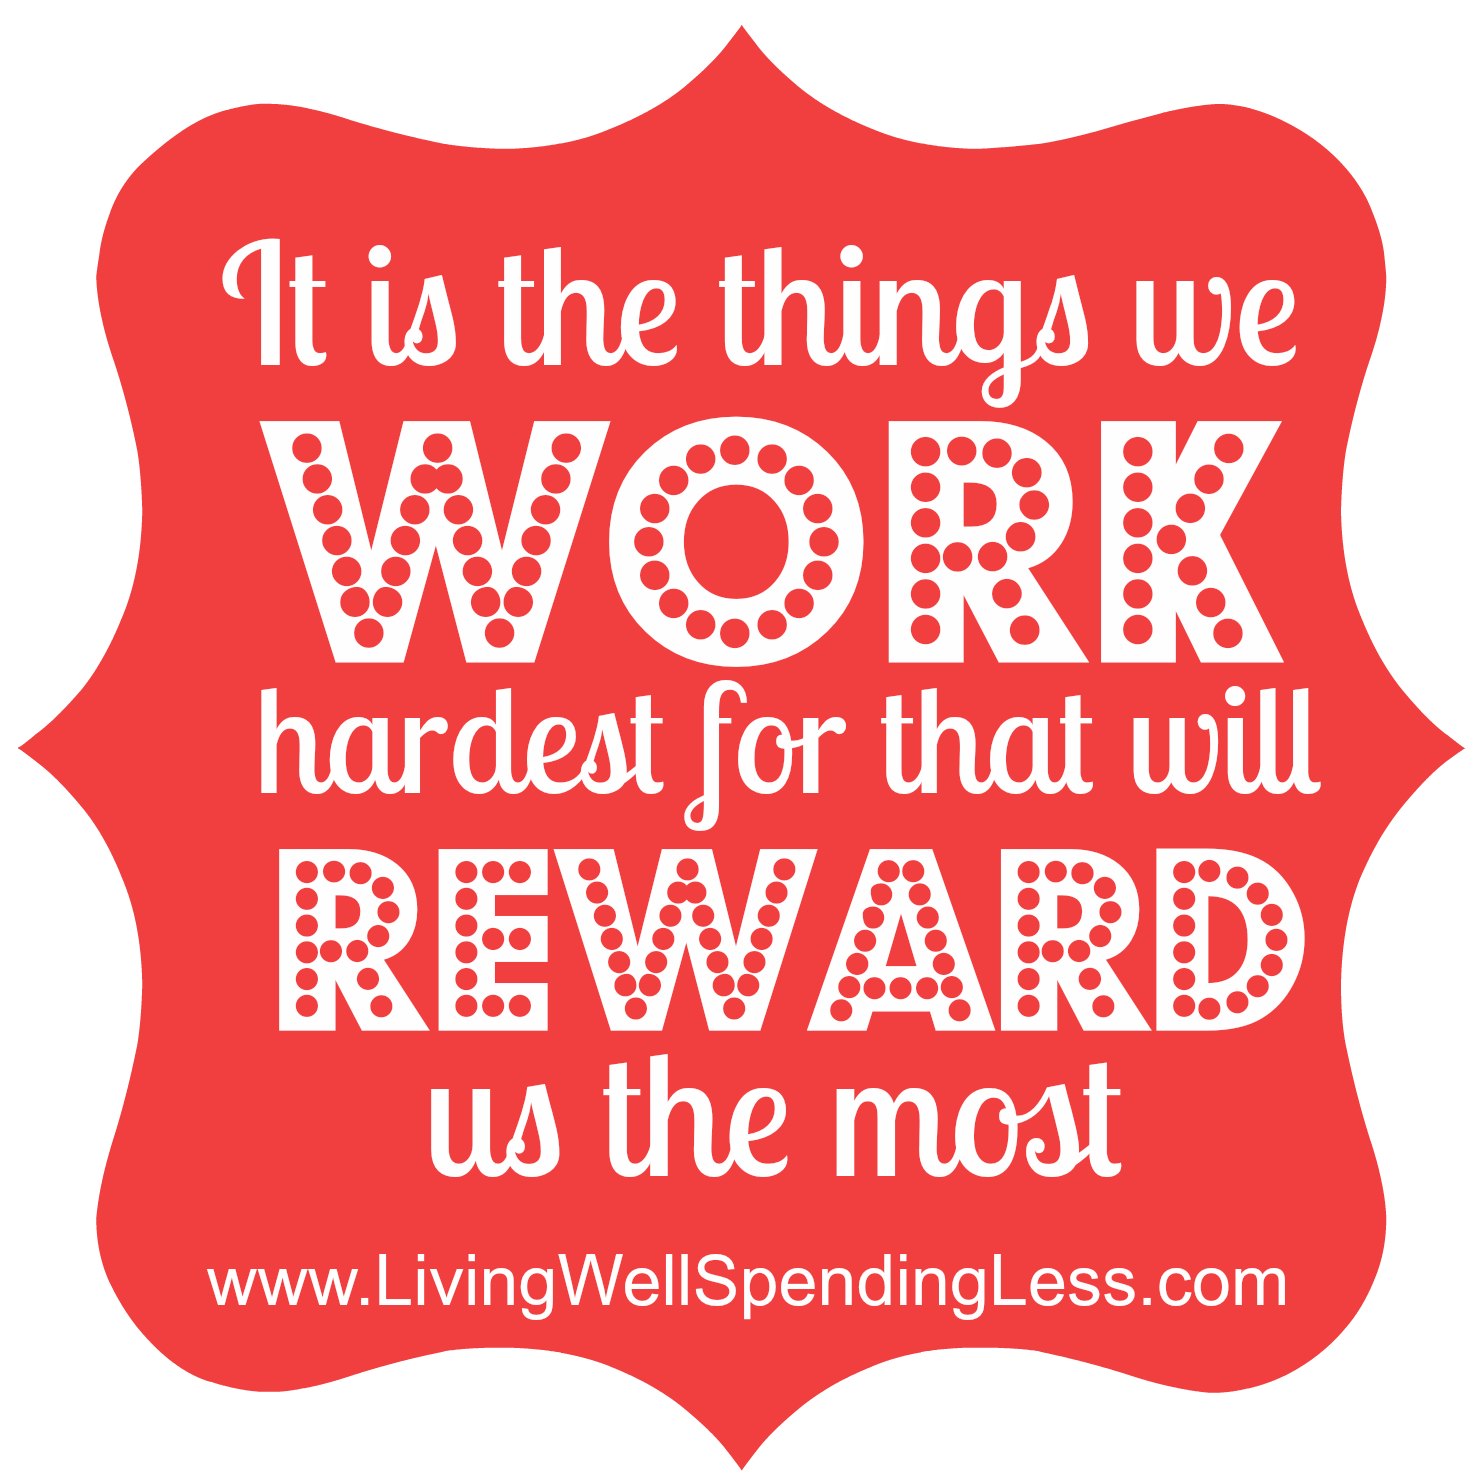 ... it is the things you work hardest for that will reward you the most